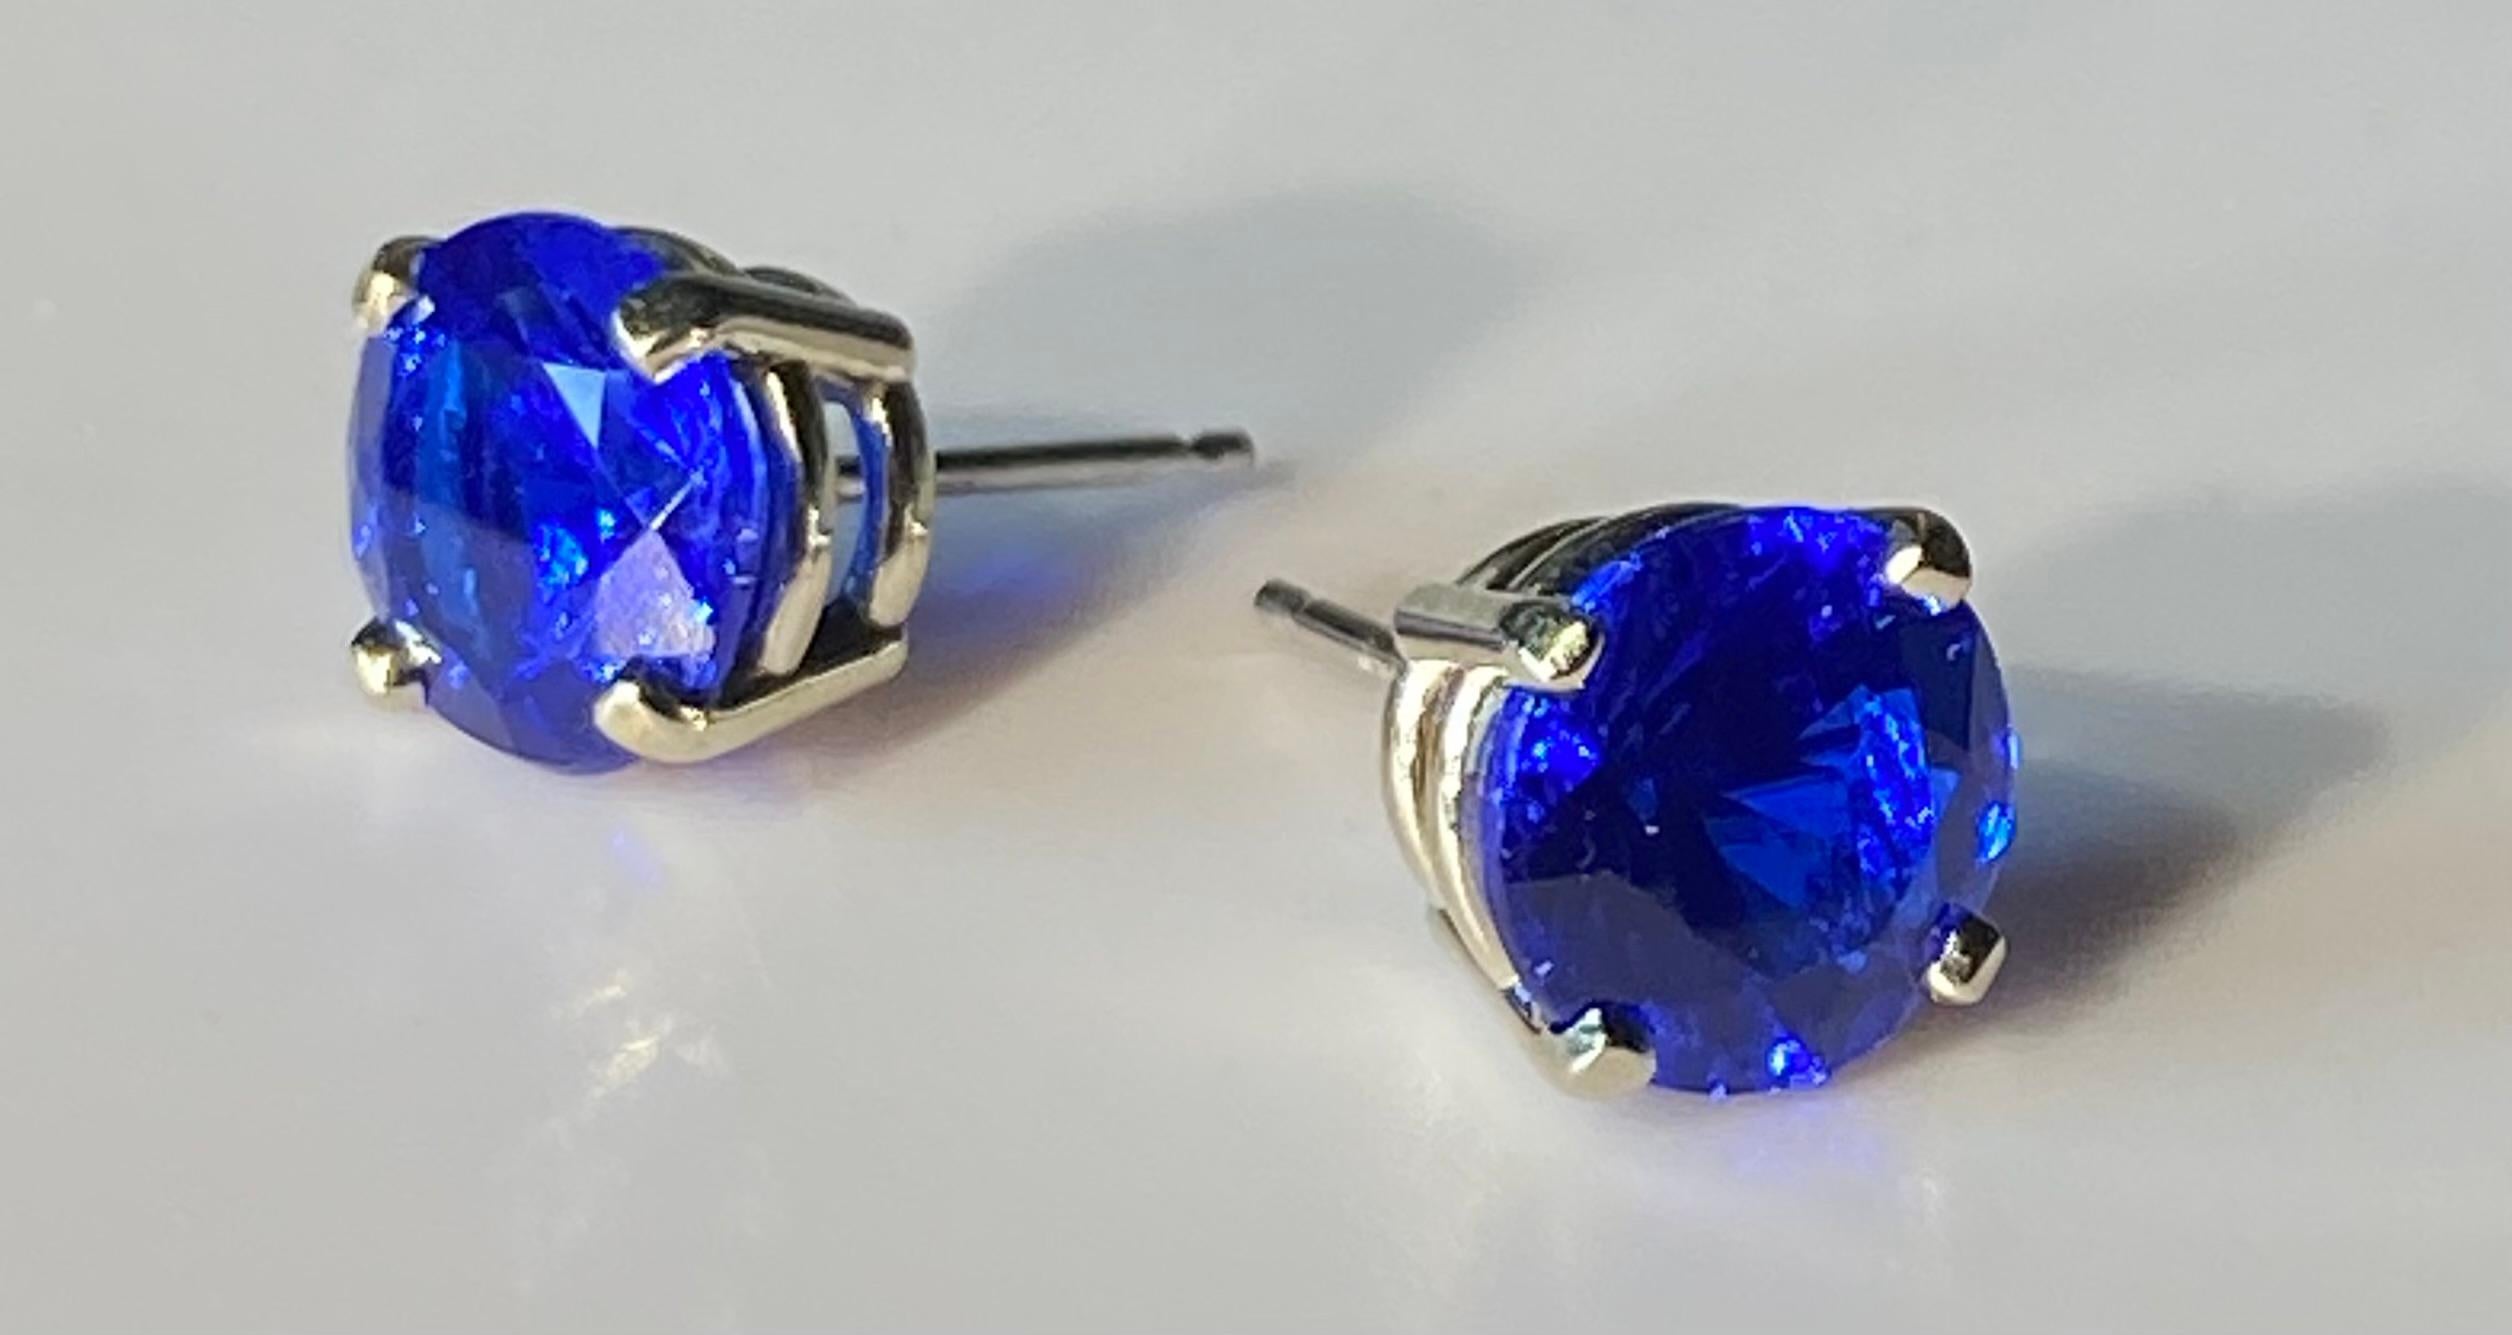 14kt White Gold Stud Earrings set with Blue Garnets., The Vivid Blue Yttrium Aluminum Garnet Earrings stand out and POP.. These are eye catchers and will attract attention..

Originally from San Diego, California, Kary Adam lived in the “Gem Capital